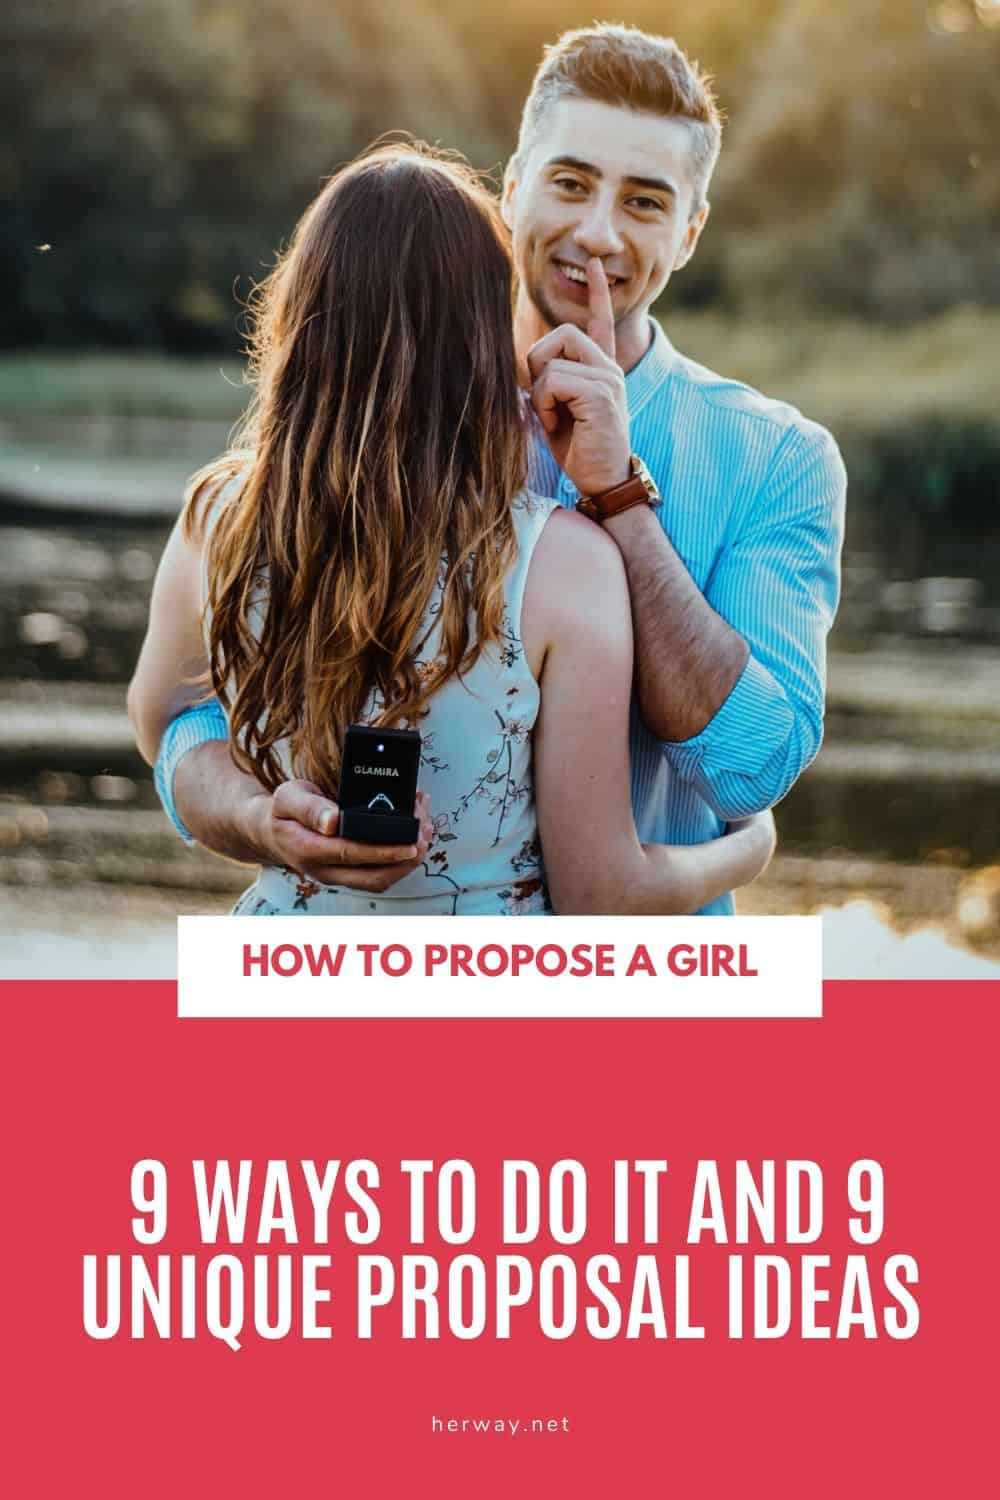 How To Propose A Girl 9 Ways To Do It And 9 Unique Proposal Ideas